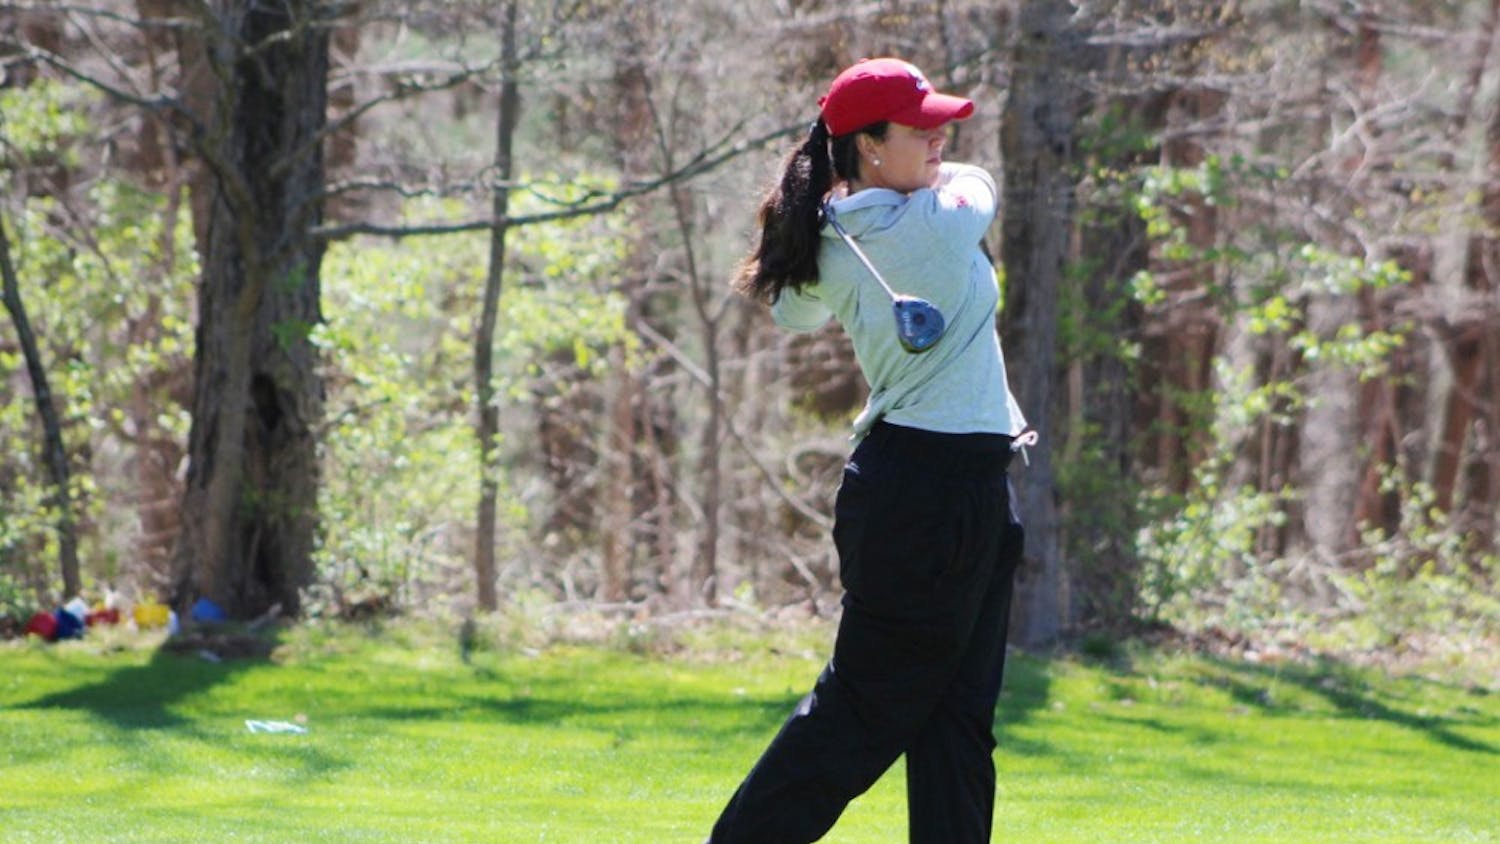 Then-senior Ana Sanjuan tees off during the first round of the April 2017 IU Invitational at IU Golf Course. The IU women's golf team placed seventh at the Coeur d’Alene Resort Collegiate Invitational in Coeur d'Alene, Idaho, on Sept. 26, 2017.